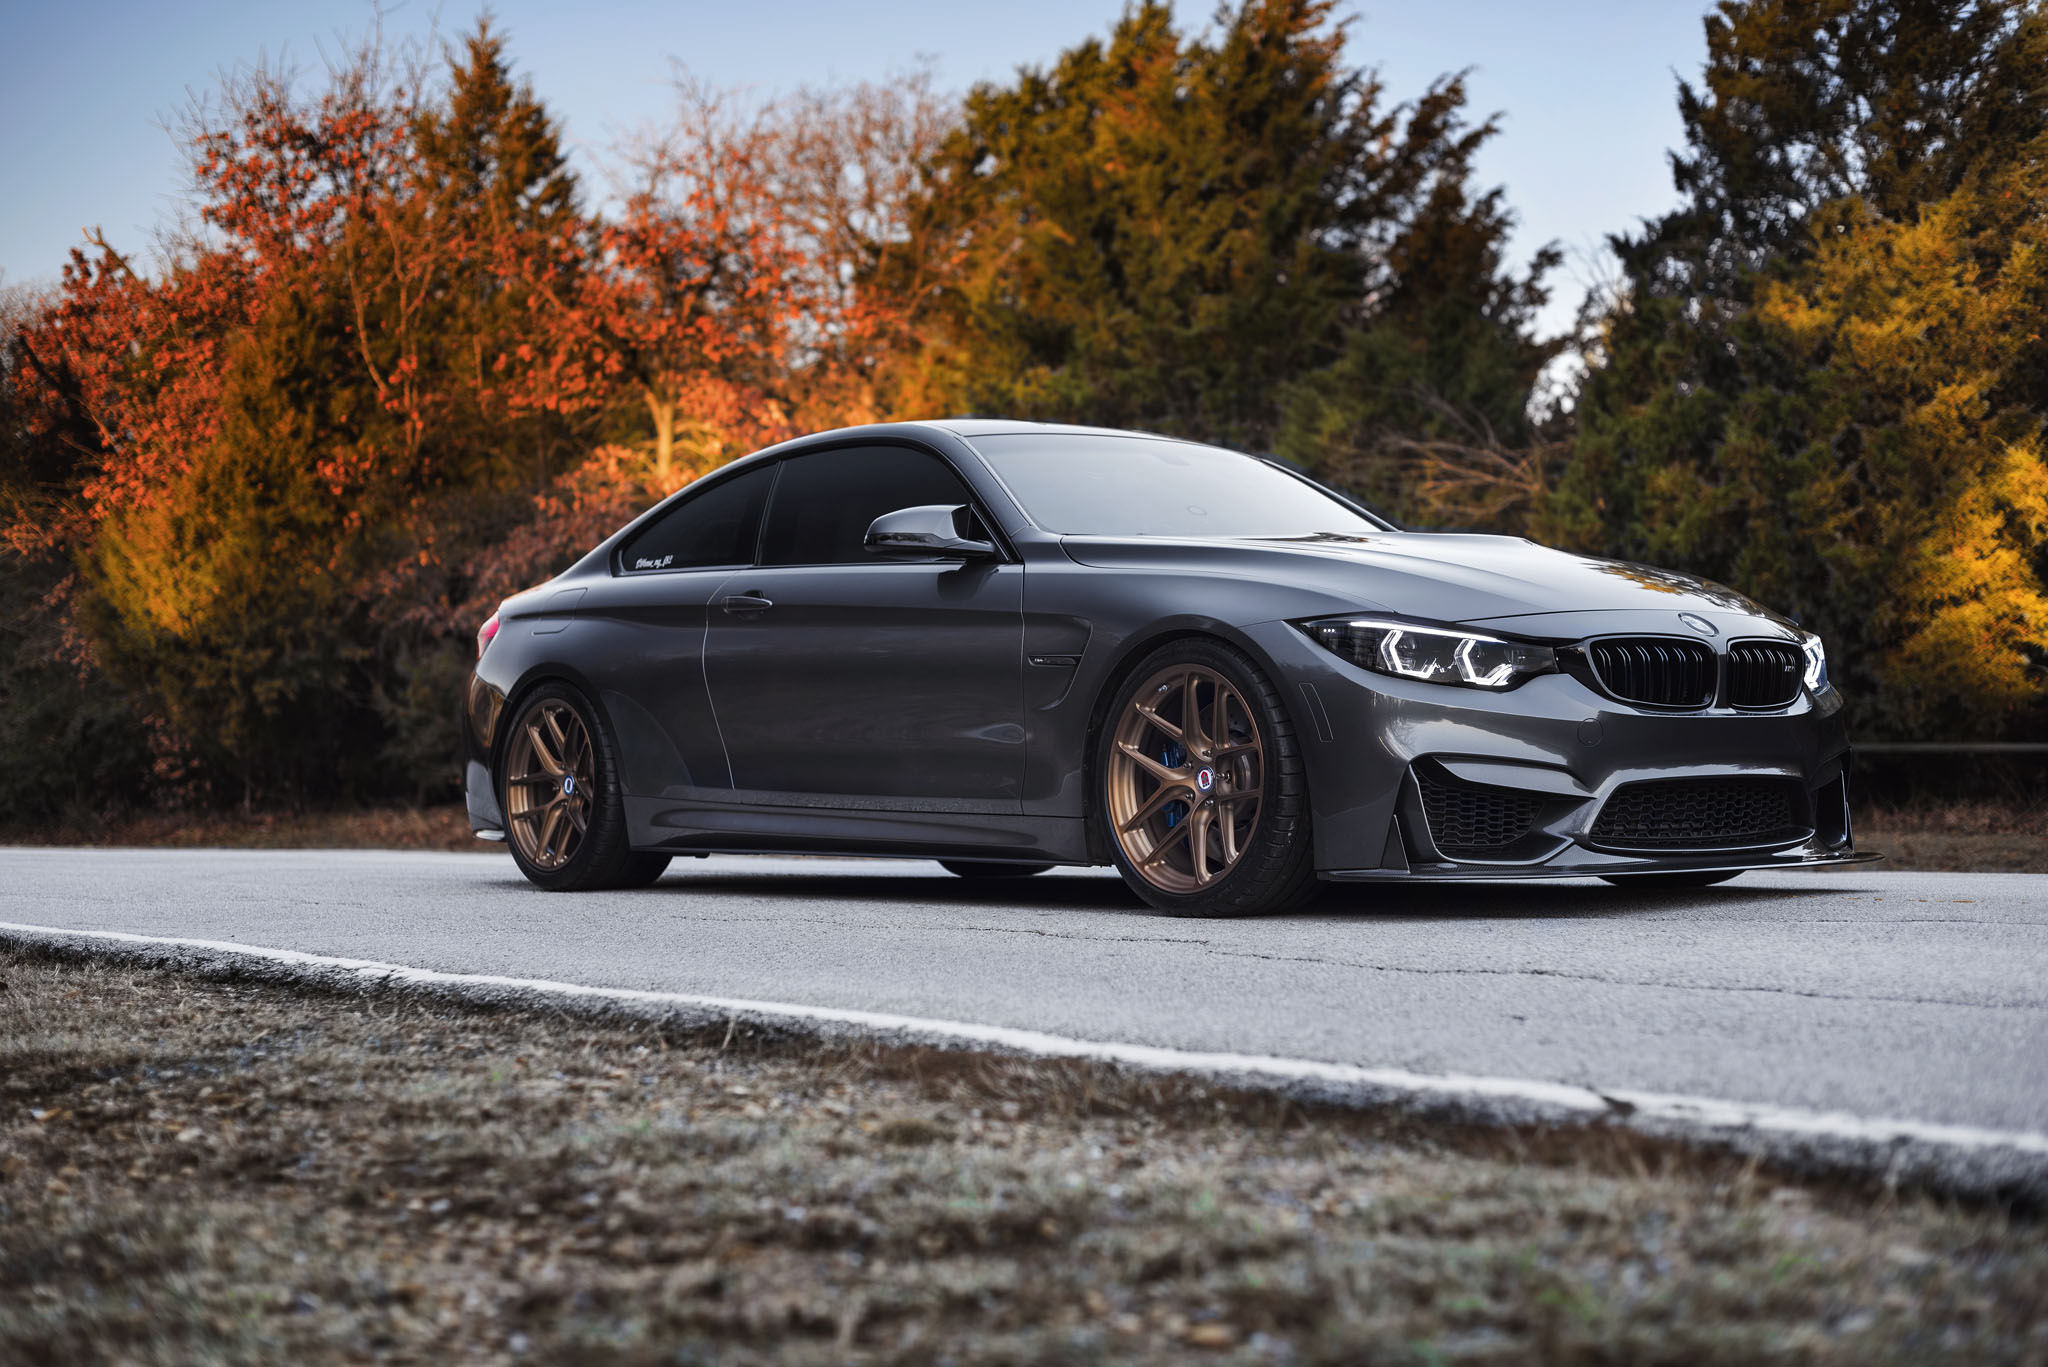 F82 BMW M4 on HRE Wheels, Features Akrapovic Exhaust for Wilder Growl